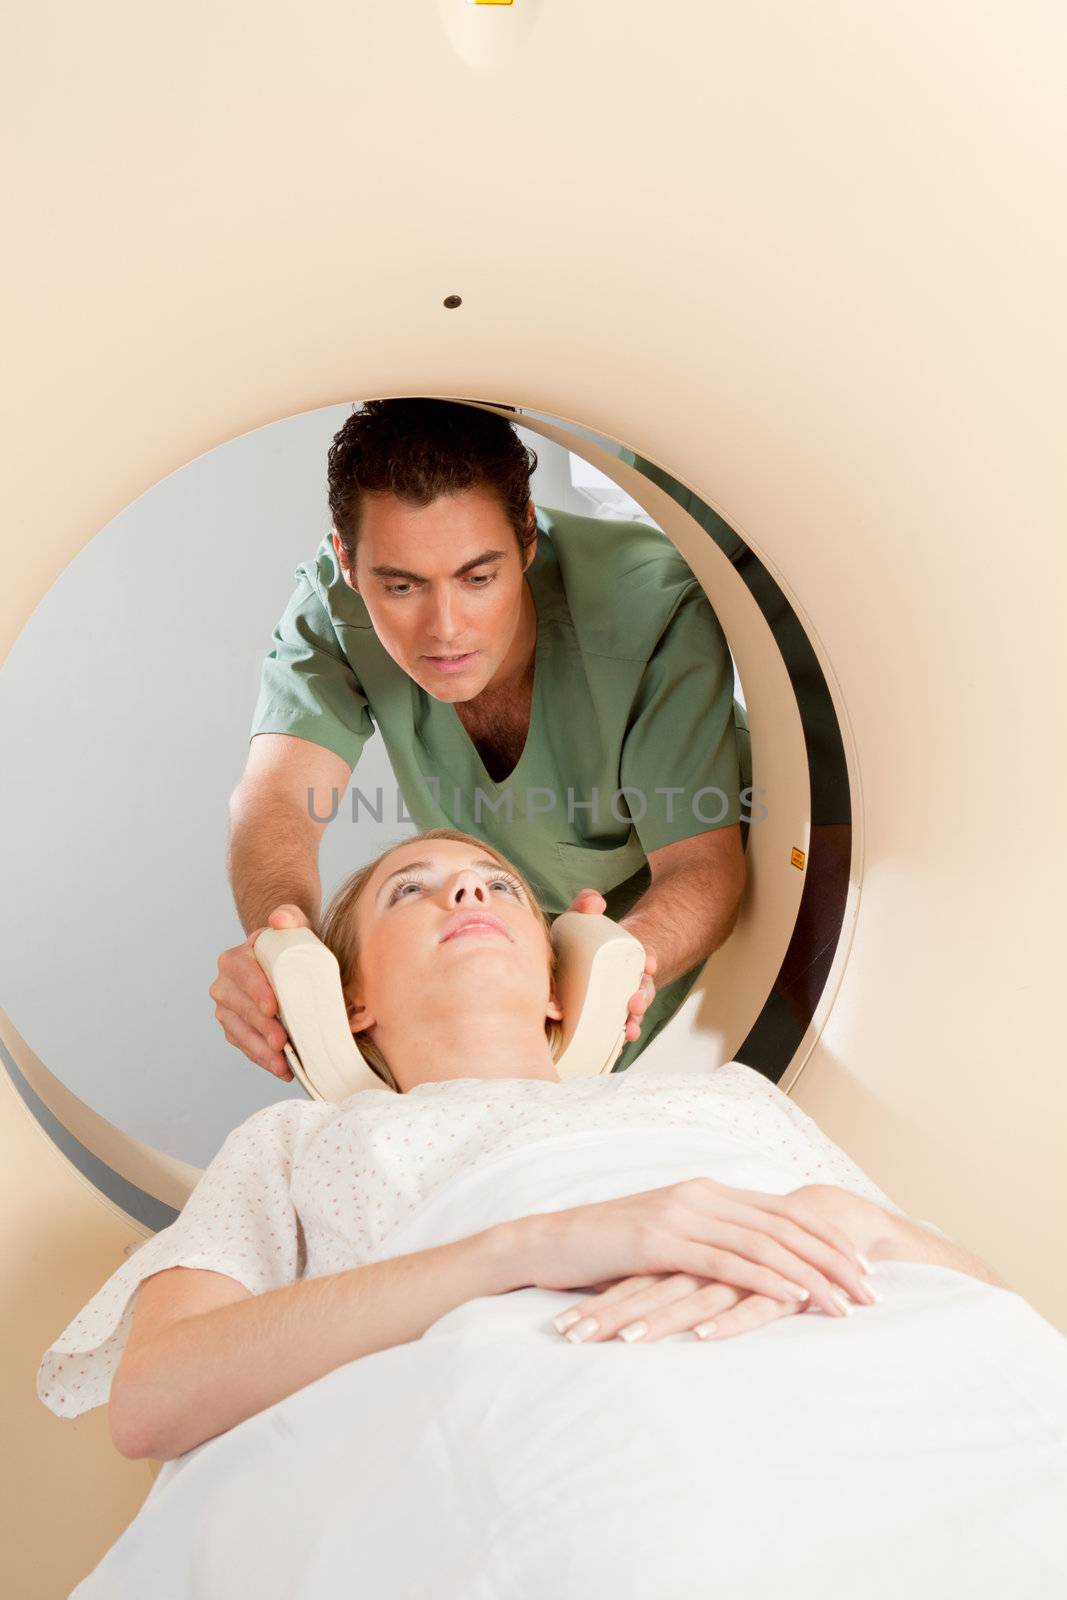 A young woman having a CT scan taken - Nurse getting things prepared